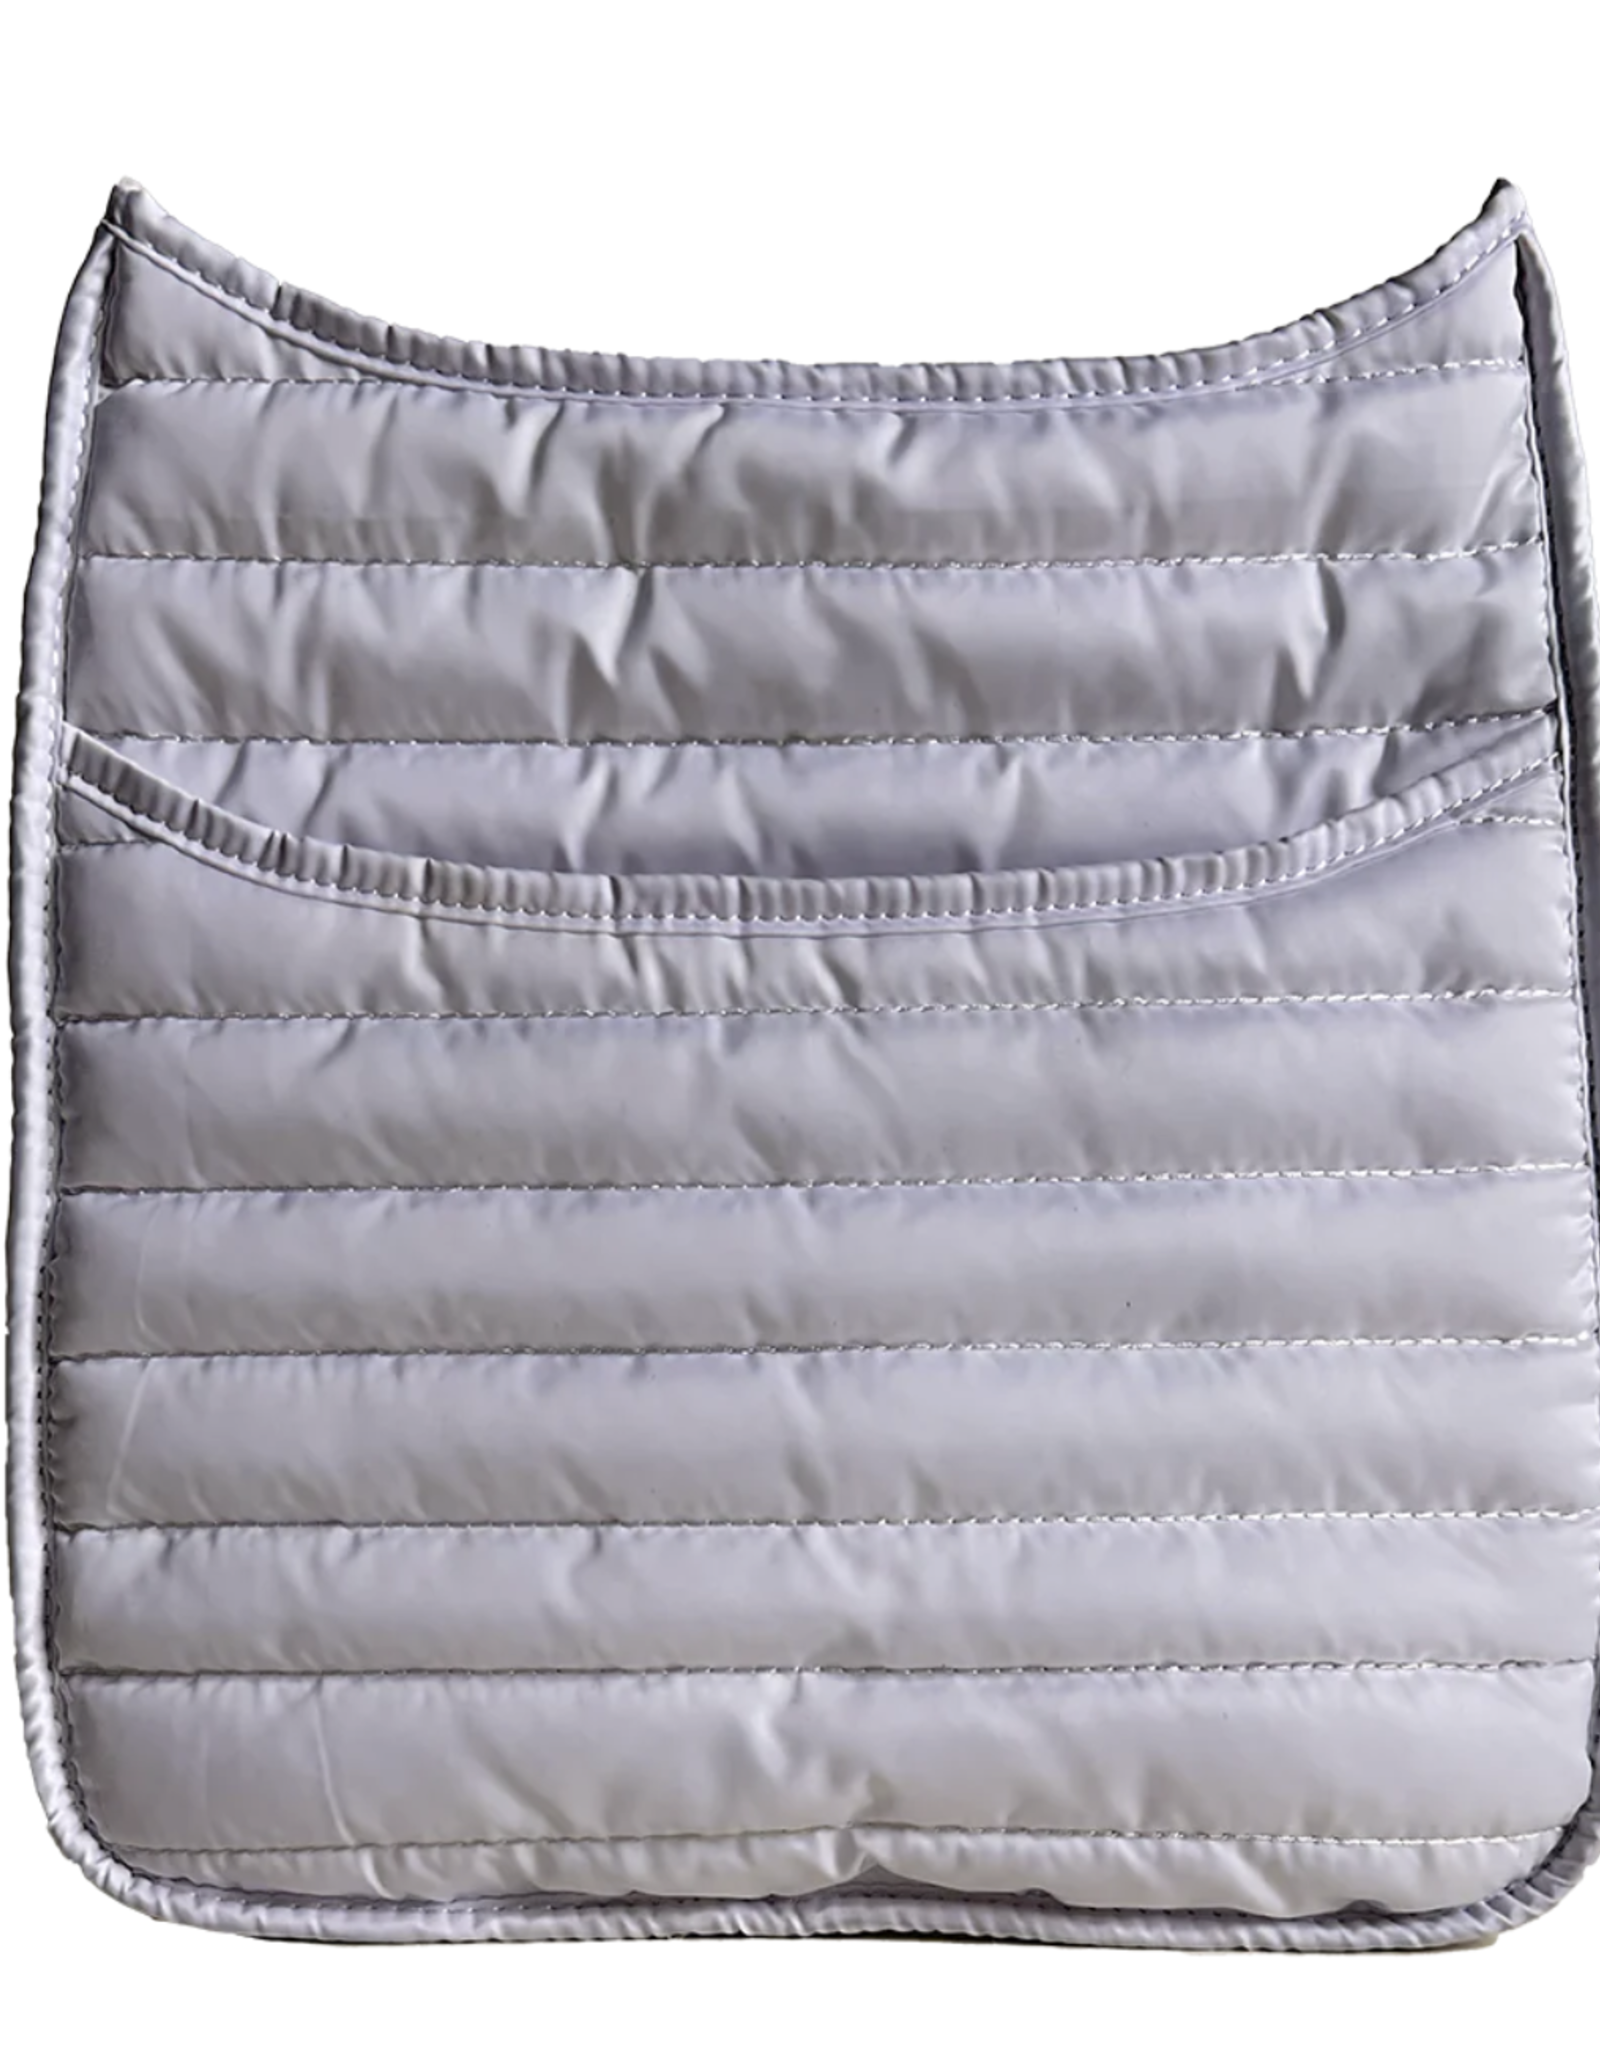 Ah-dorned BAG ONLY Ahdorned Everly Quilted Puffy Messenger